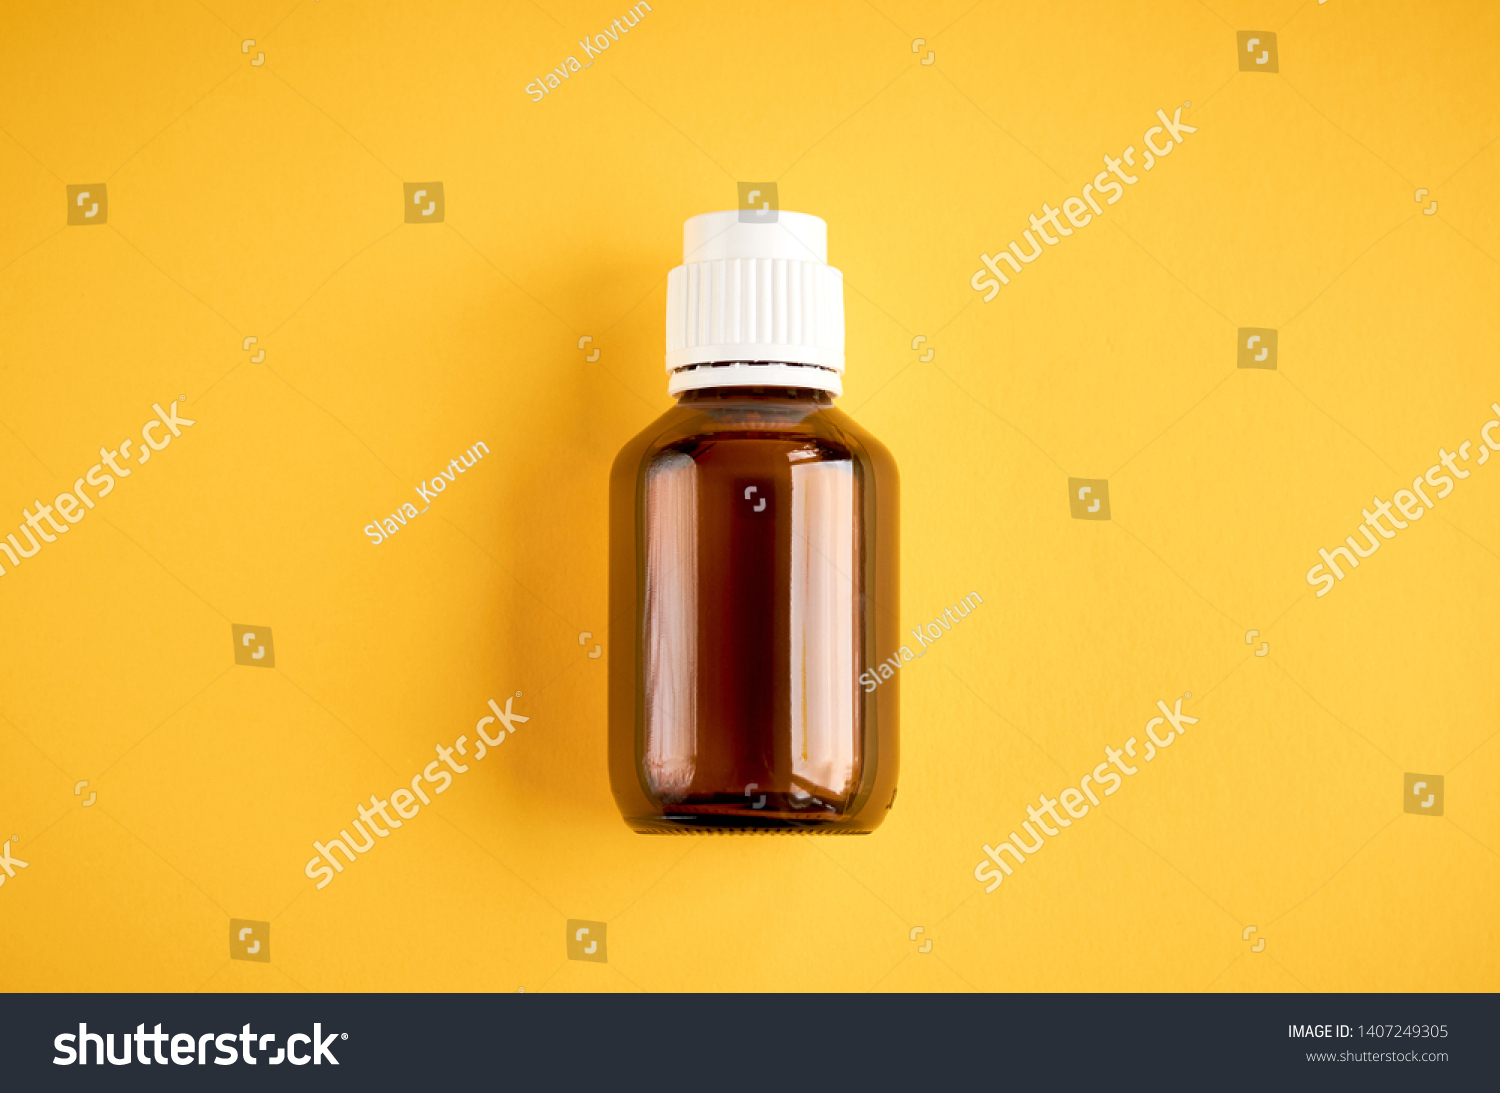 Download Syrup Glass Bottle Composition On Yellow Stock Photo Edit Now 1407249305 Yellowimages Mockups